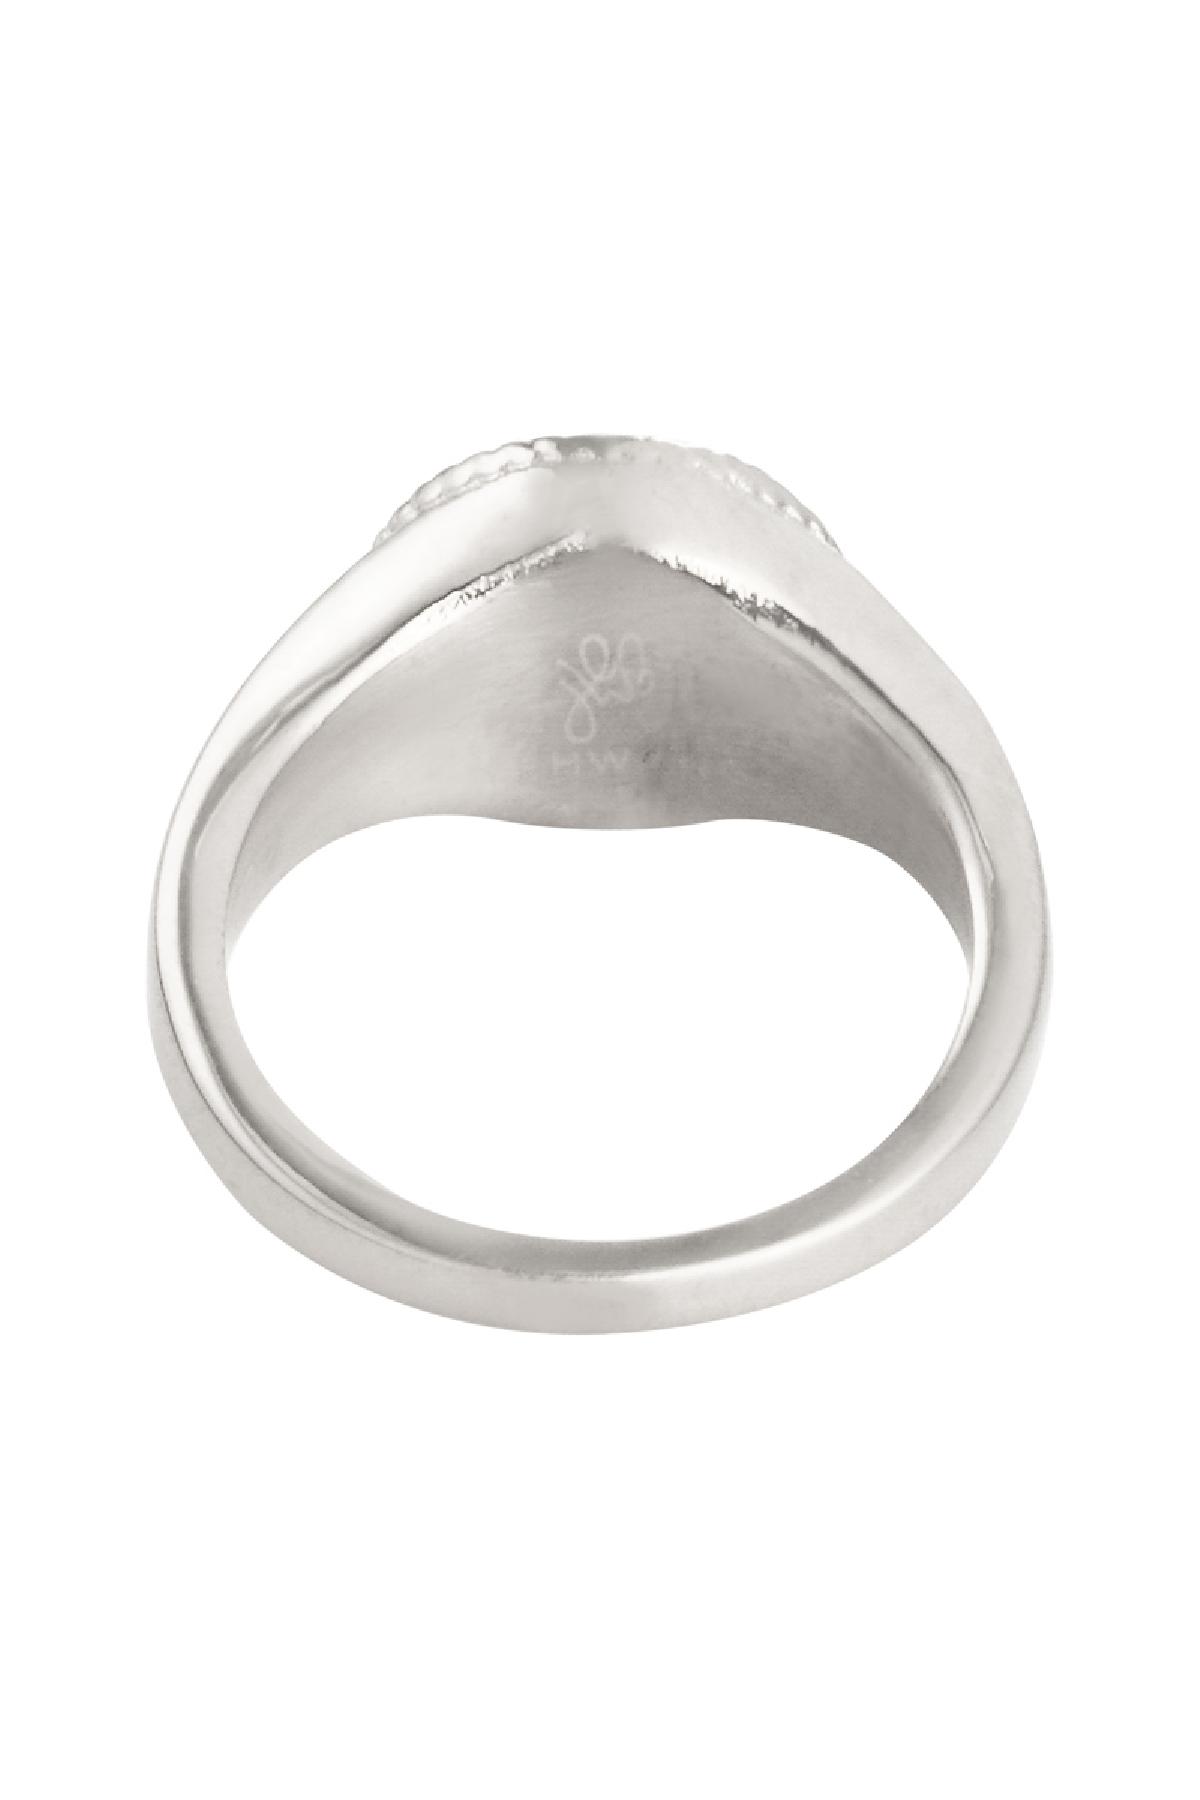 Ring Create your own Sunshine #17 Silver Stainless Steel h5 Picture2